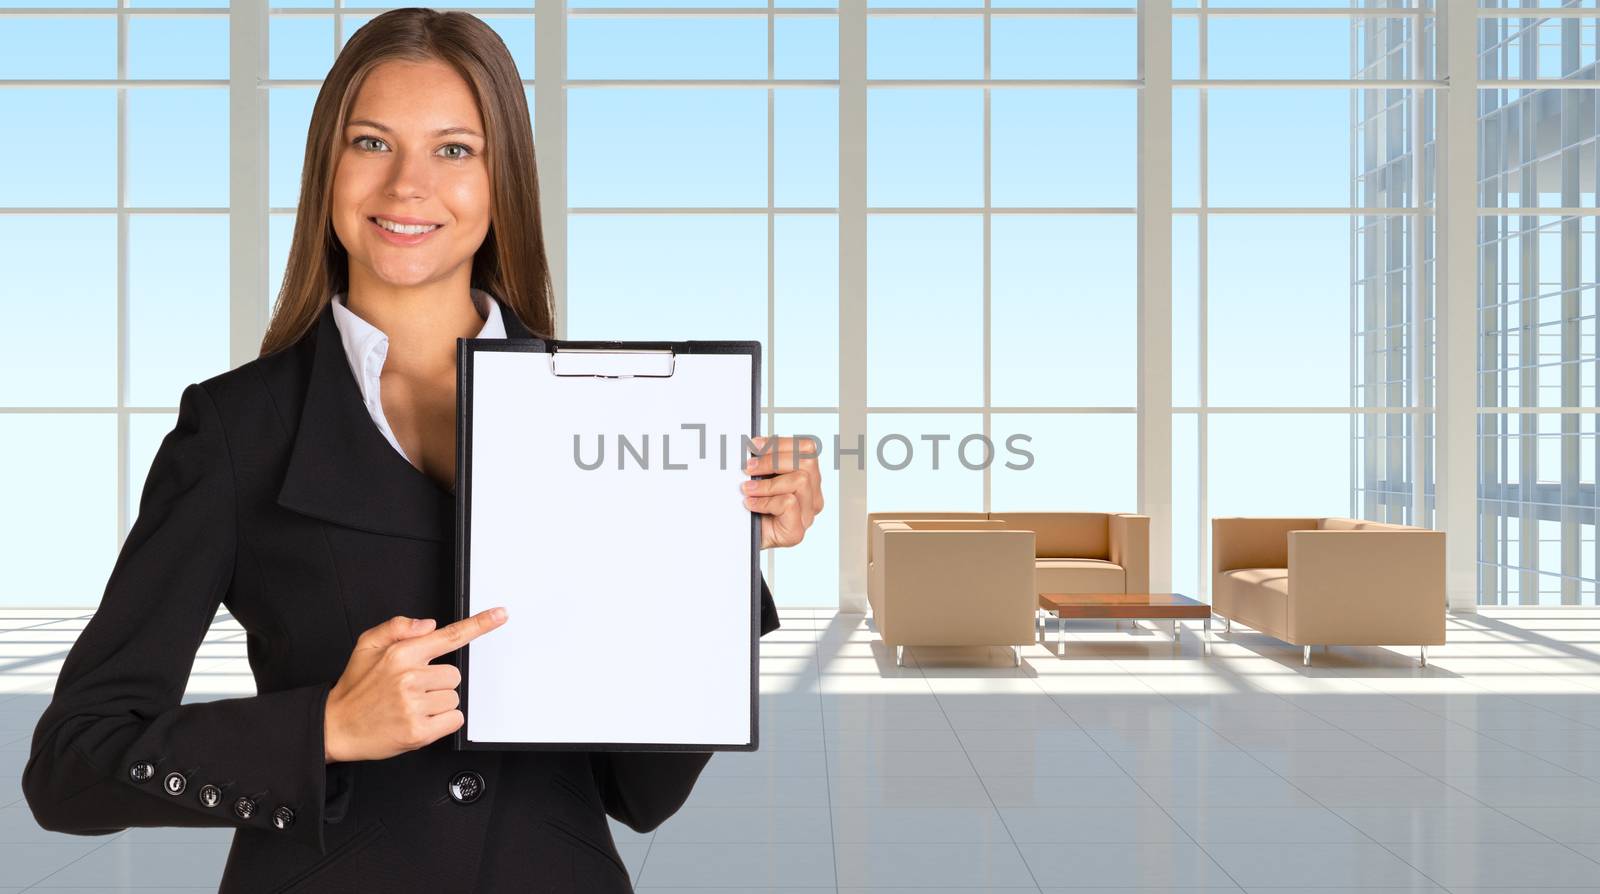 Businesswoman holding paper holder. Large window in office building as backdrop